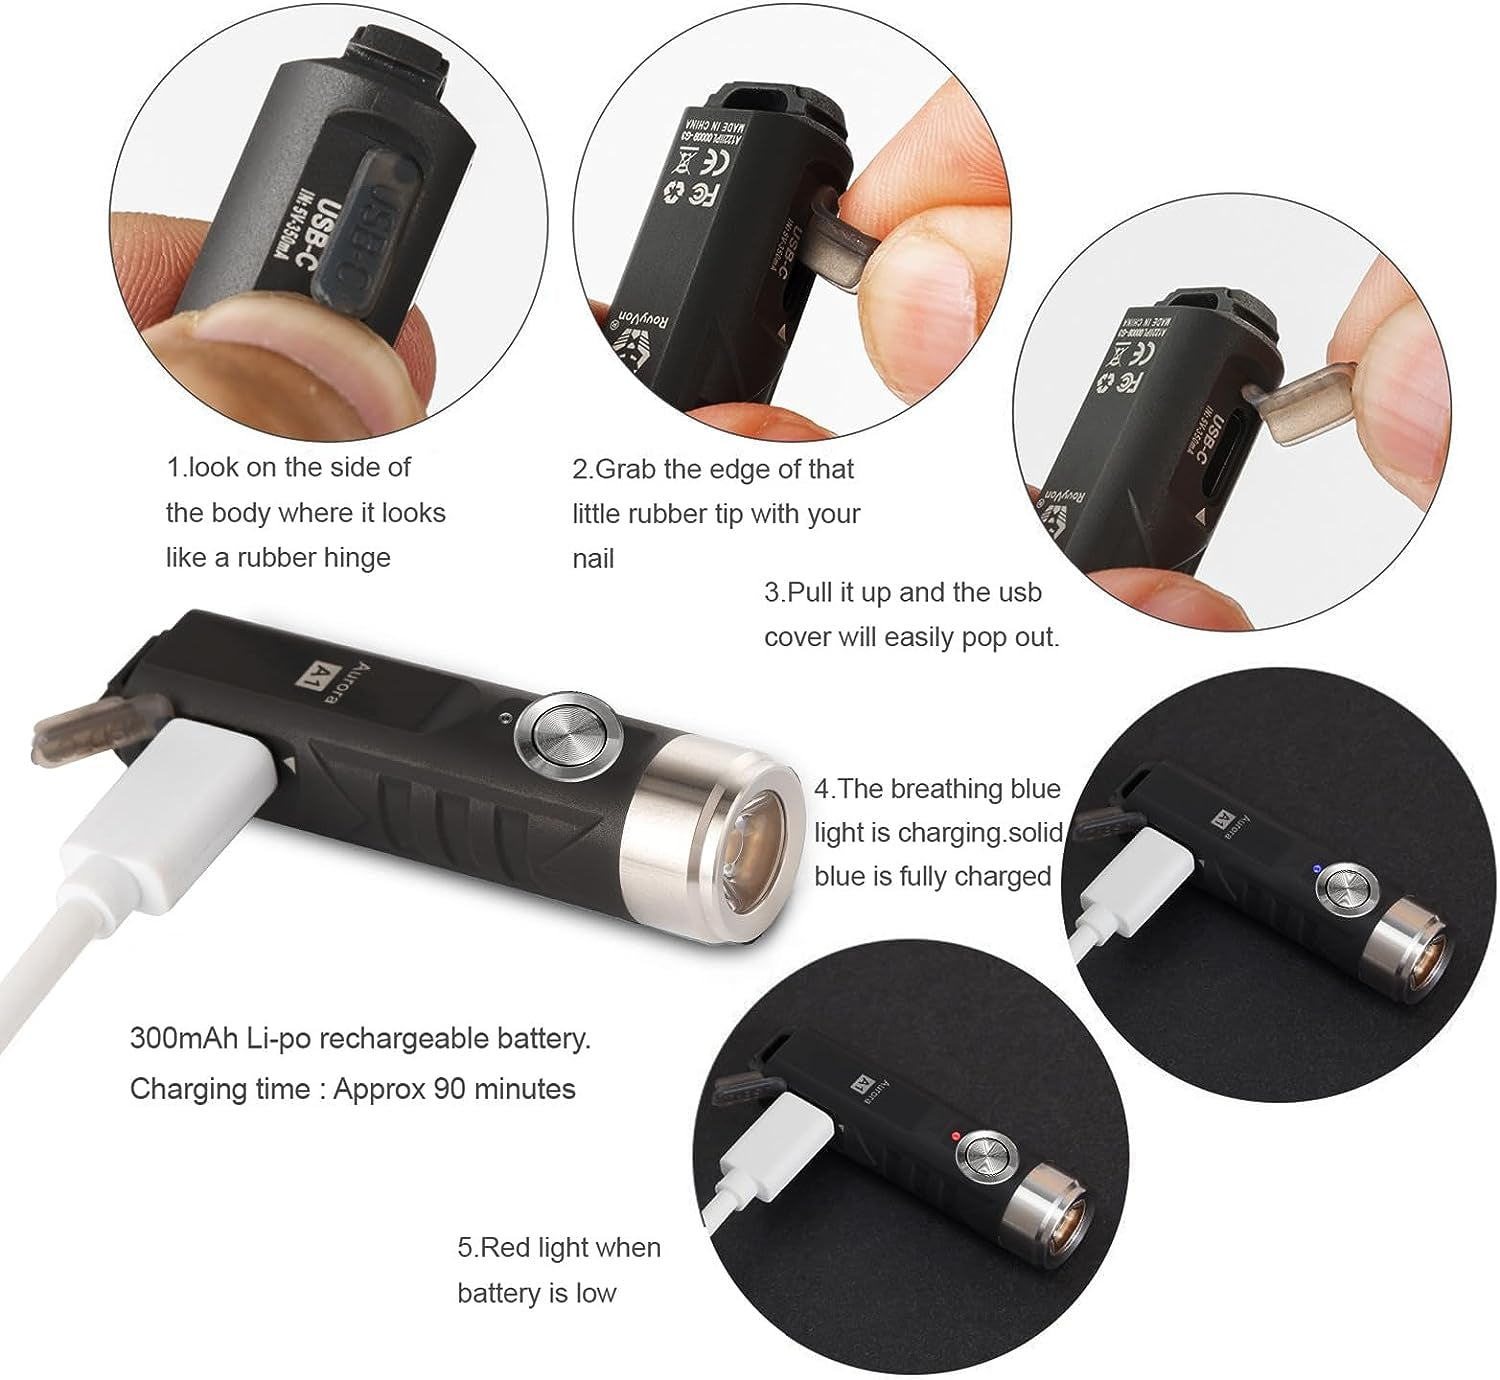 A1 Gen 4 Rechargeable EDC Flashlight 650 Lumens Super Bright Outdoor Mini Keychain Flashlights for Everyday Carry, Camping, Thanksgiving, Xmas Gift(Black)